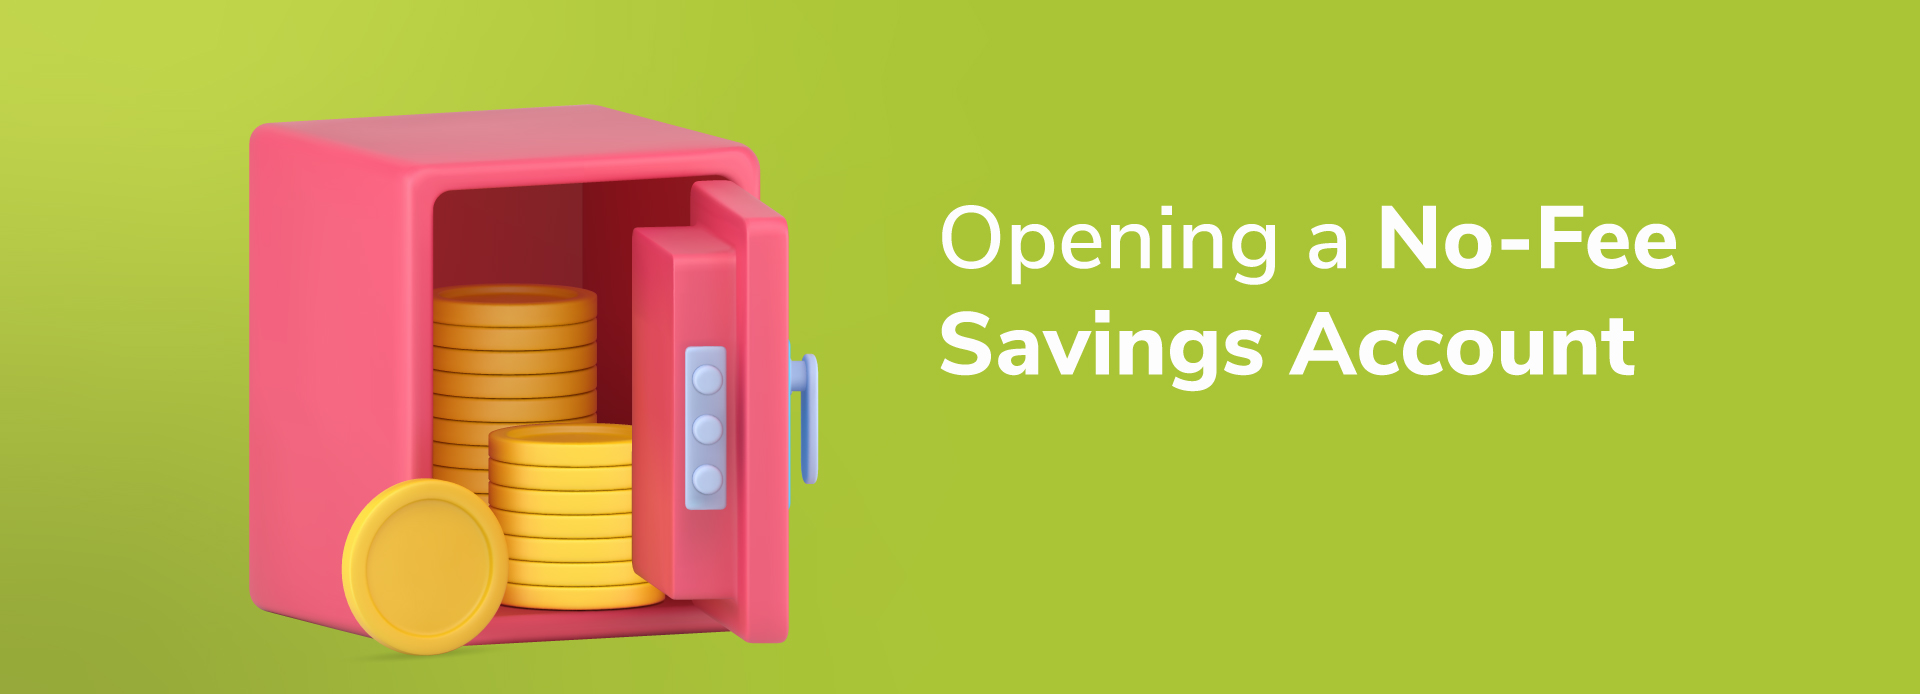 Financial Freedom at Zero Balance: Your Quick Guide to Opening a No-Fee Savings Account 